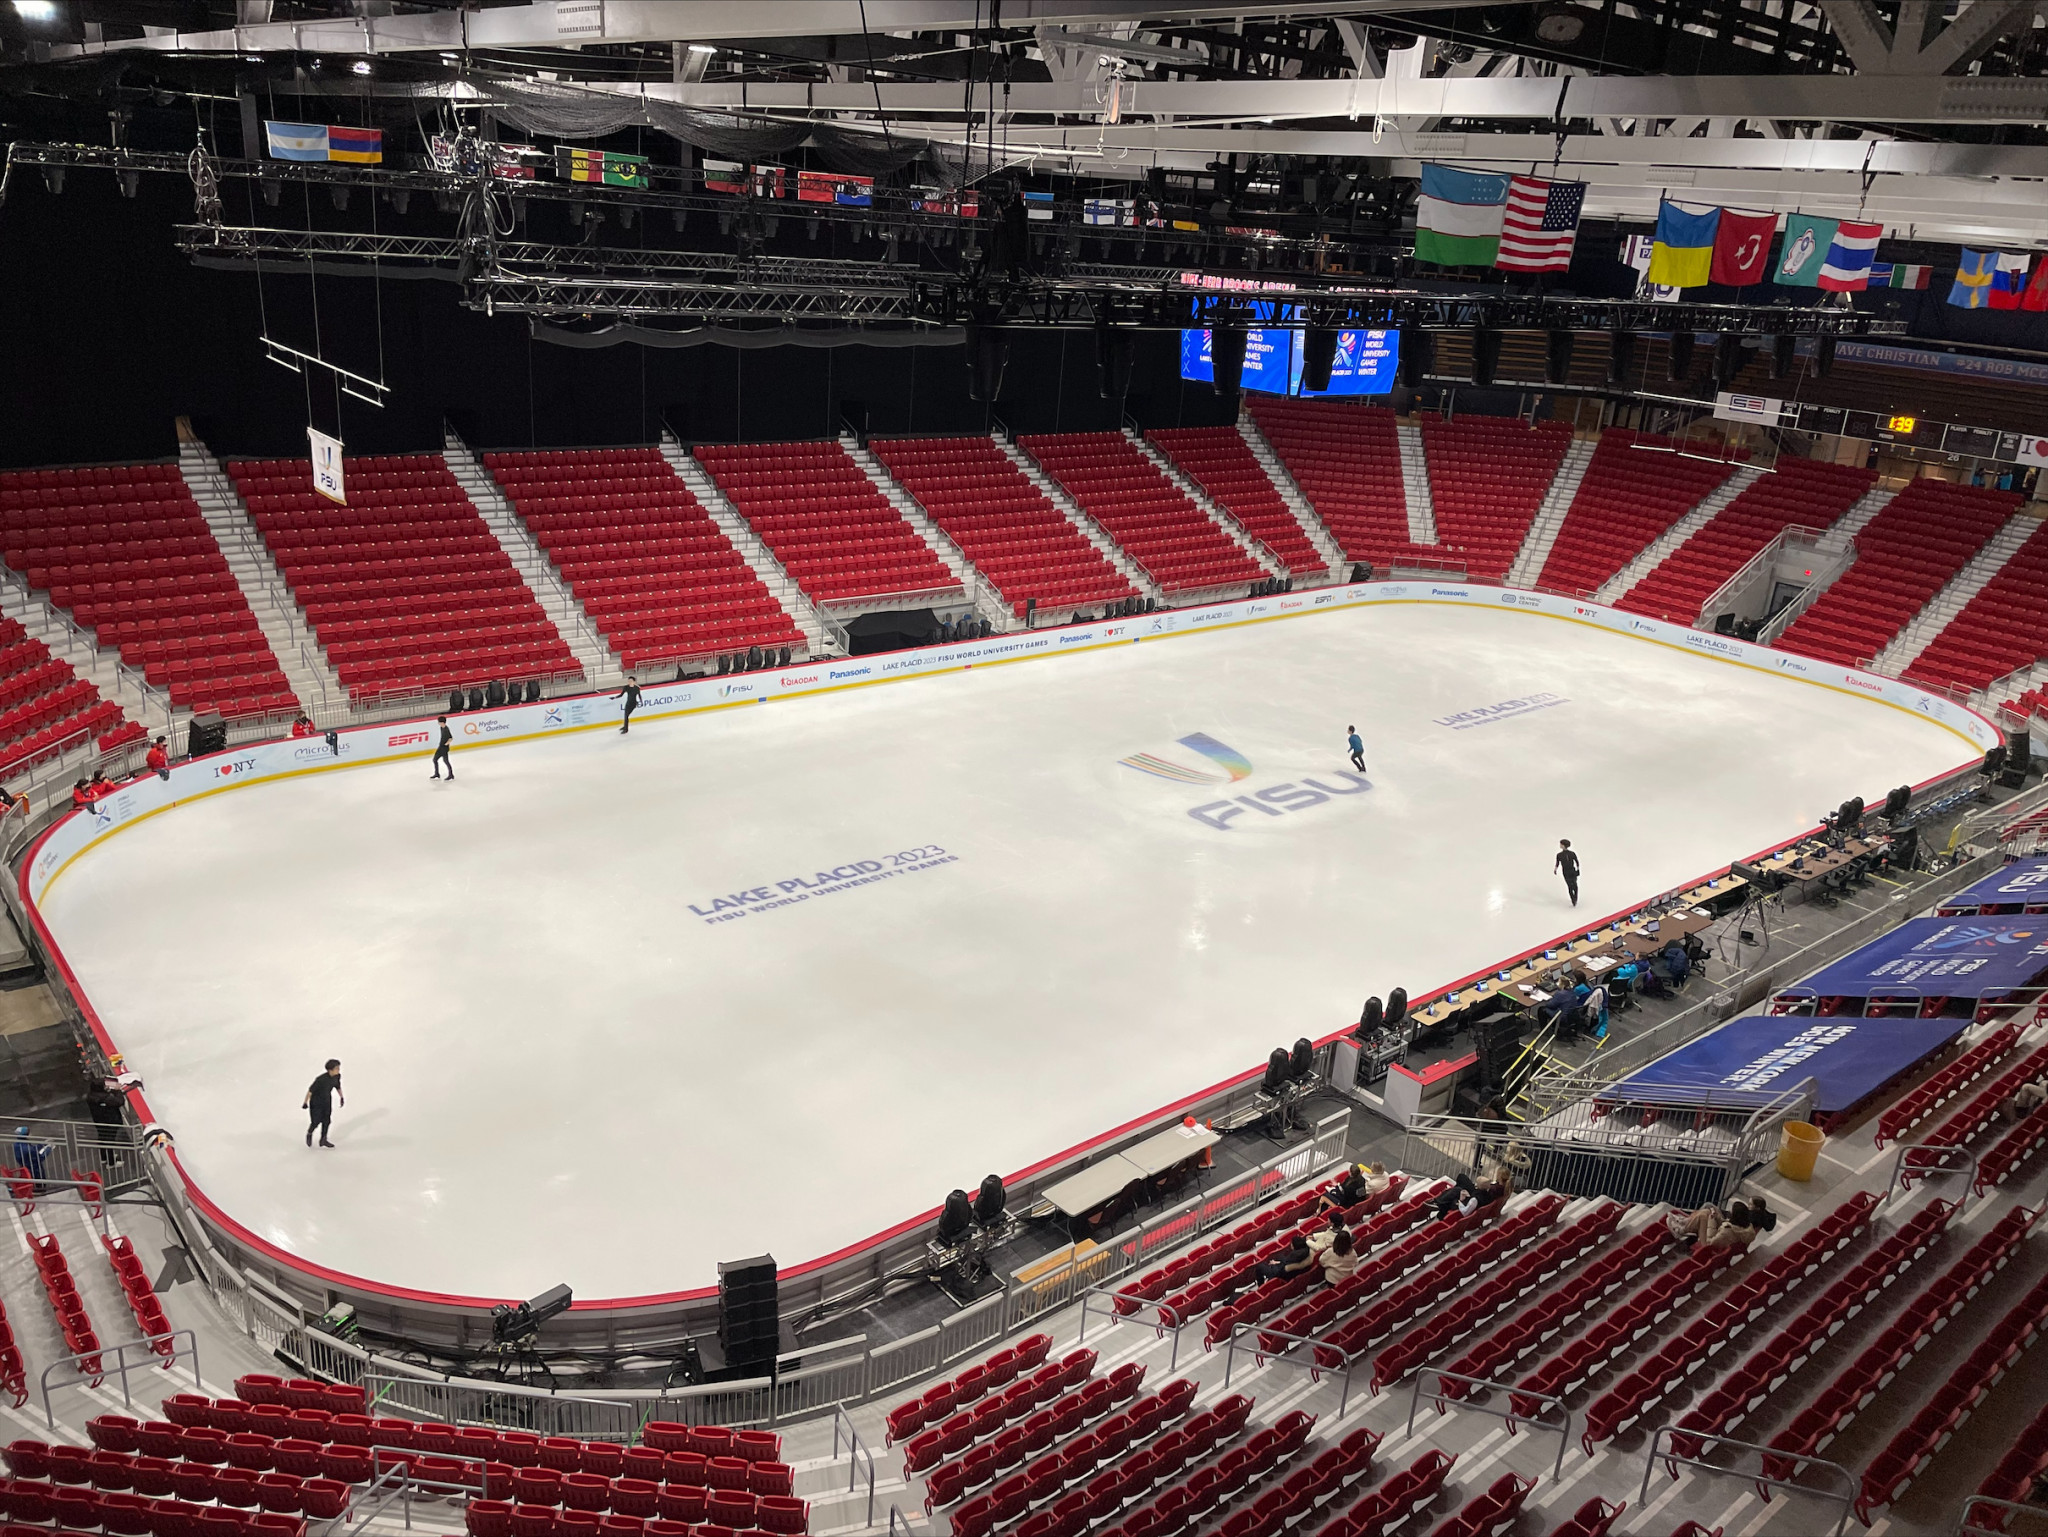 Lake Placid 2023 Opening Ceremony to pay tribute to Native Americans